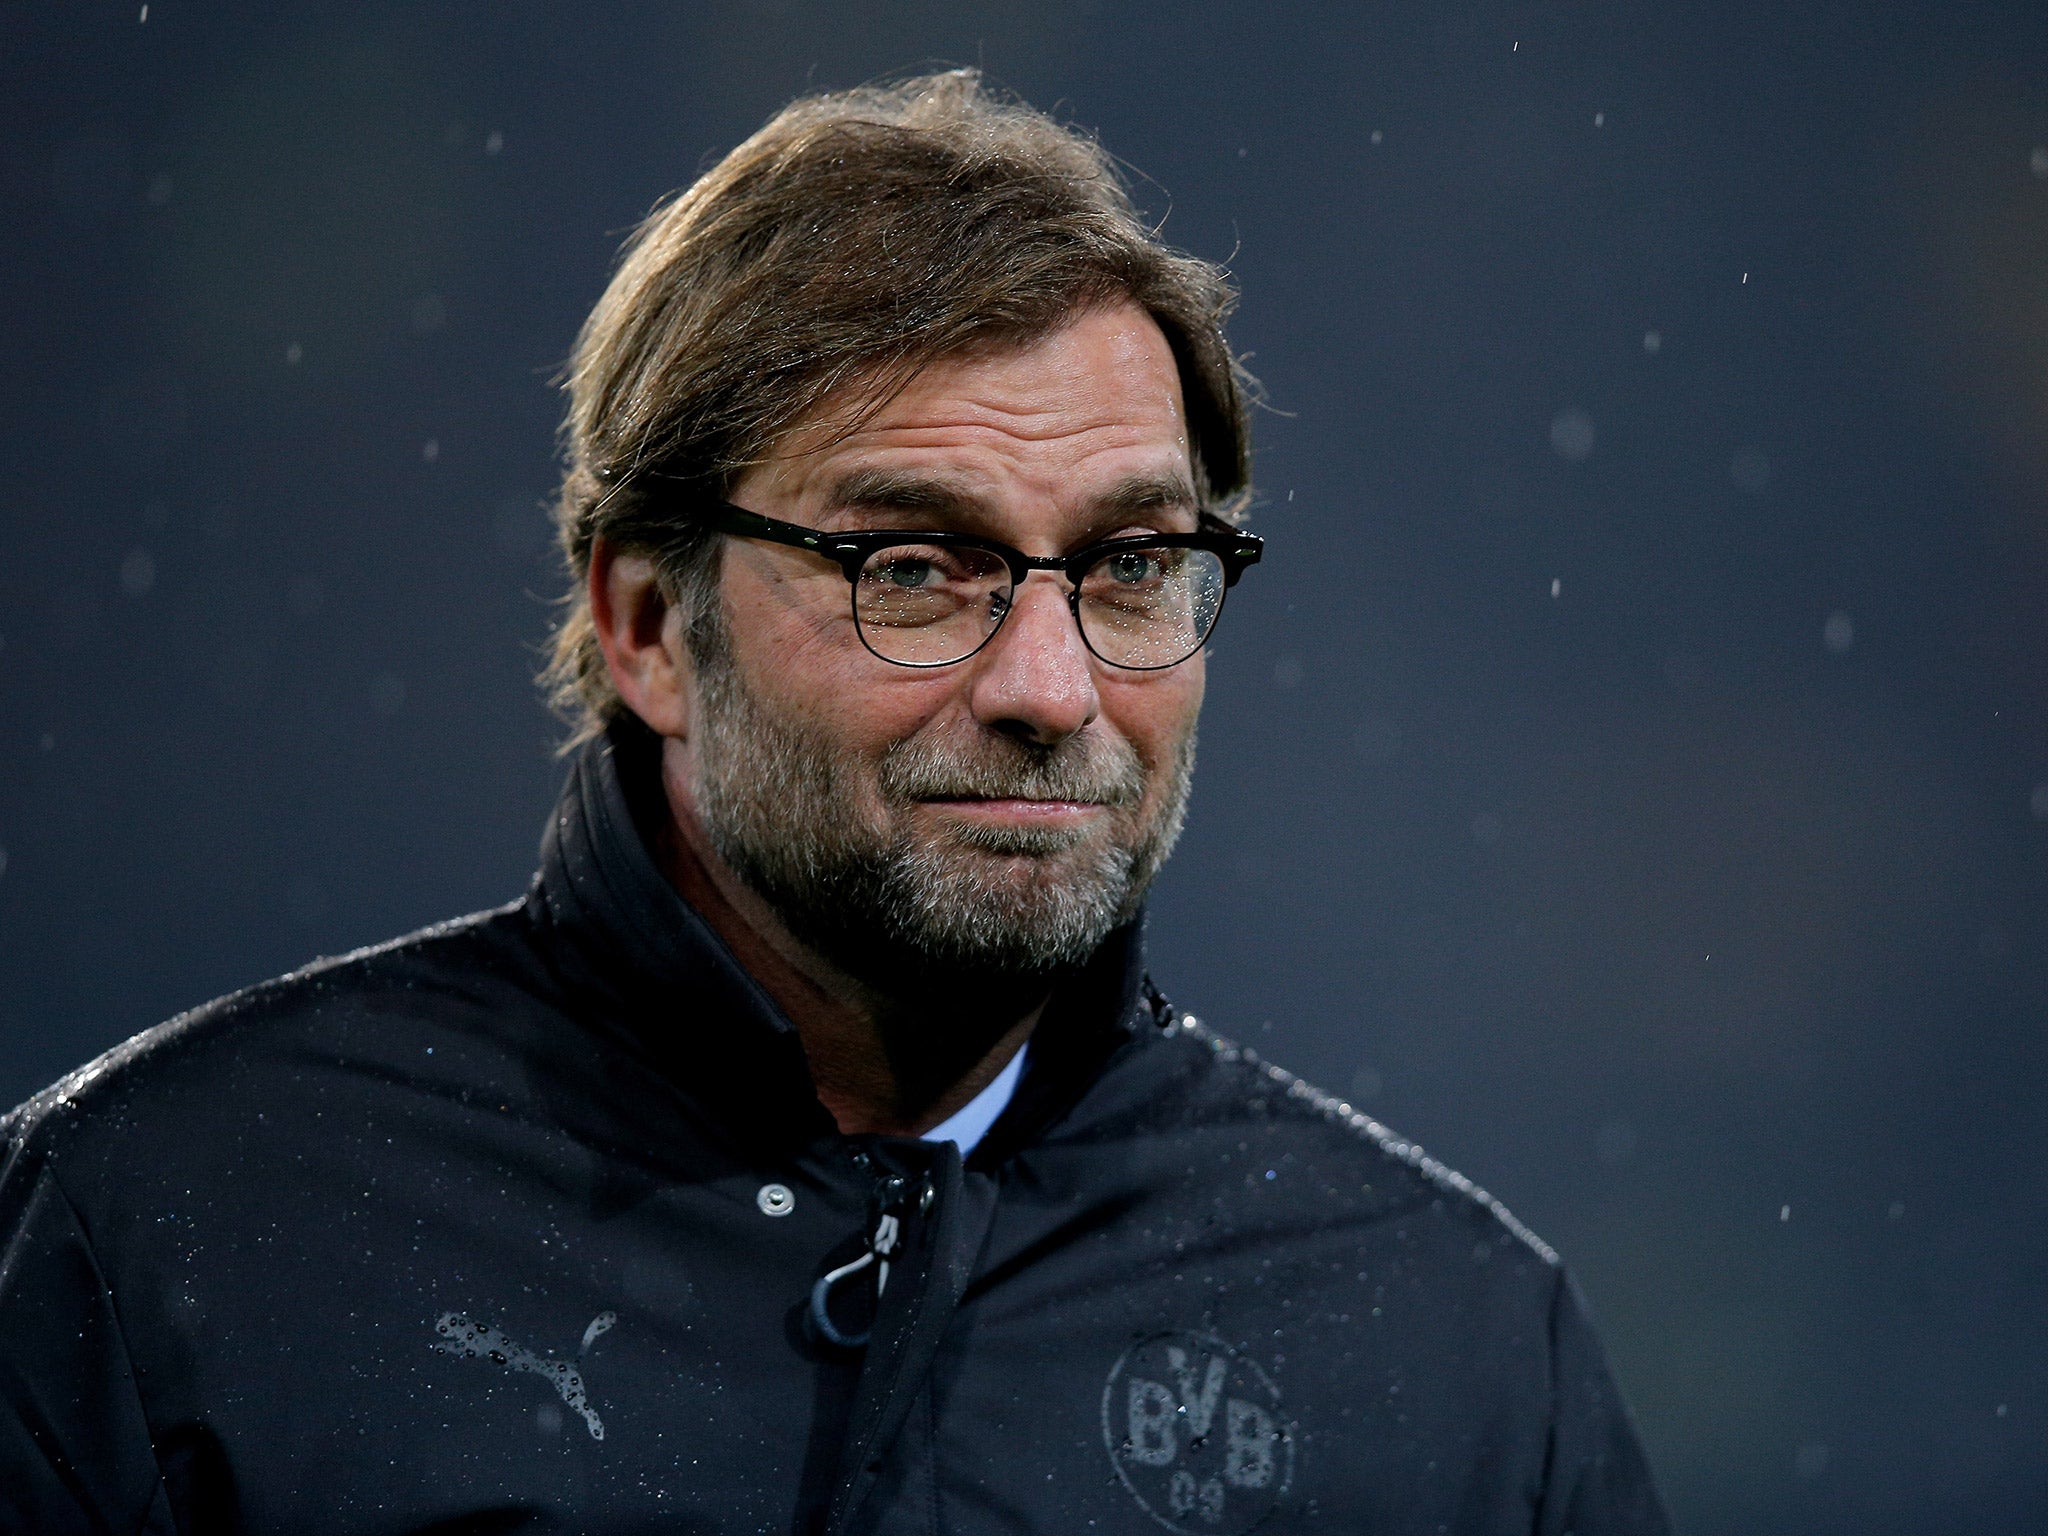 The former Borussia Dortmund coach has been heavily linked to Liverpool